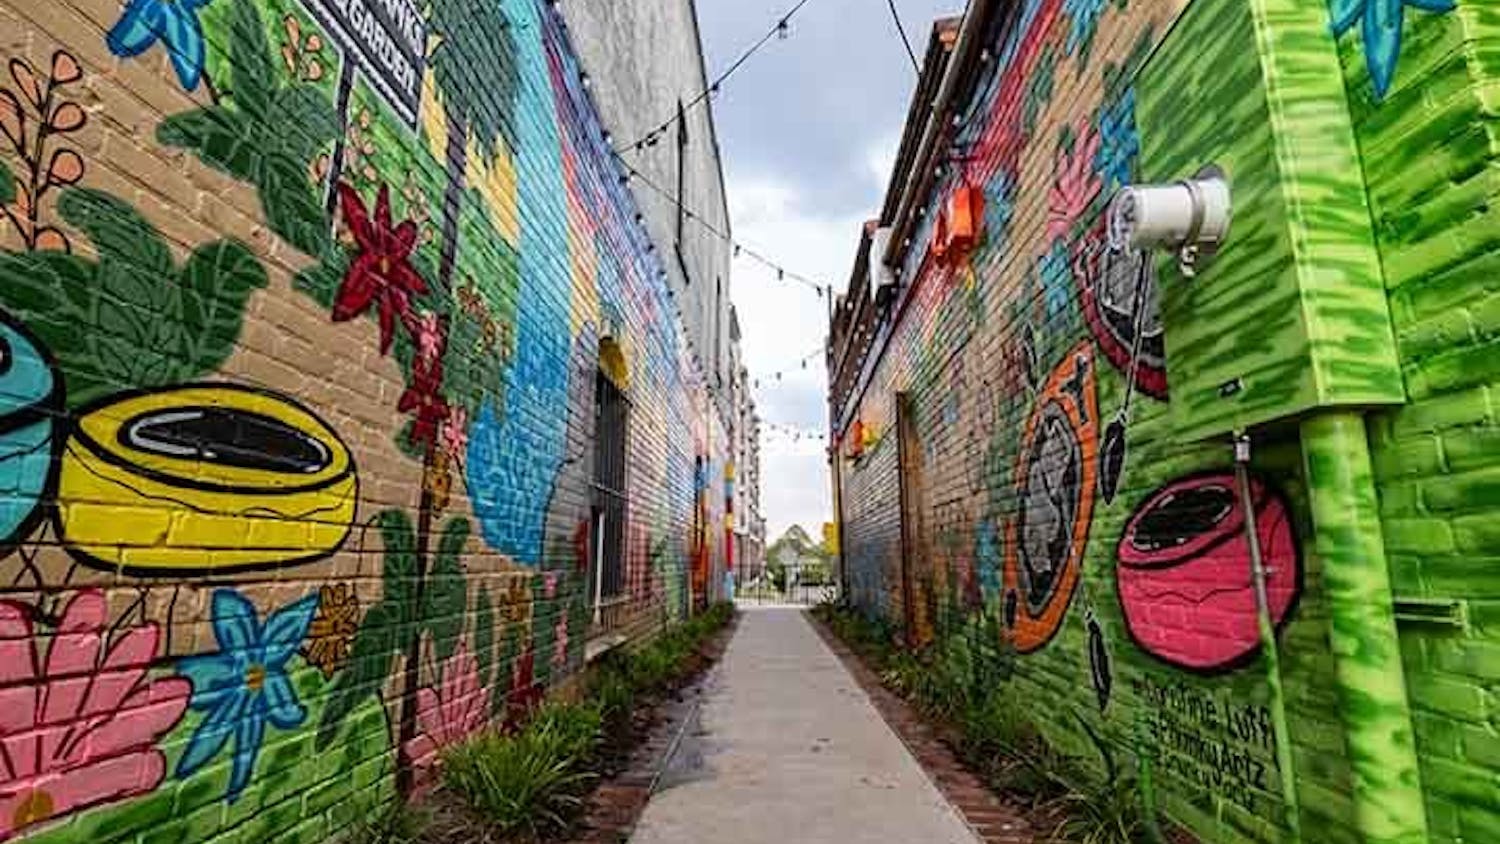 Photo of the Art Alley, which is located on State Street in Columbia, South Carolina.